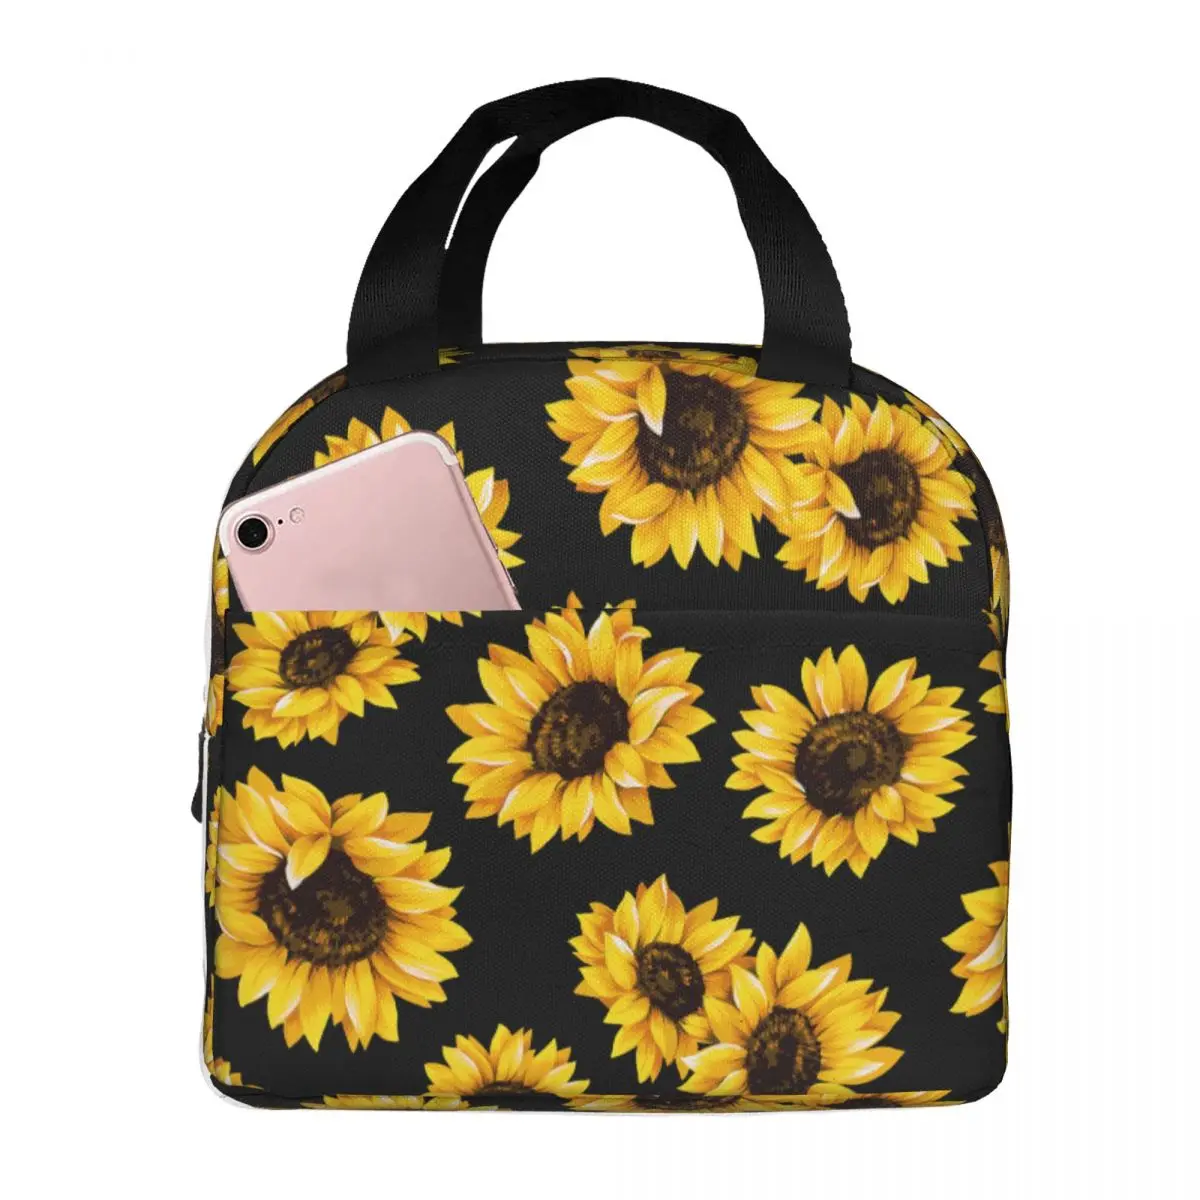 Lunch Bag for Women Kids Daisy Flower Thermal Cooler Bags Portable Picnic Work Canvas Lunch Box Food Storage Bags